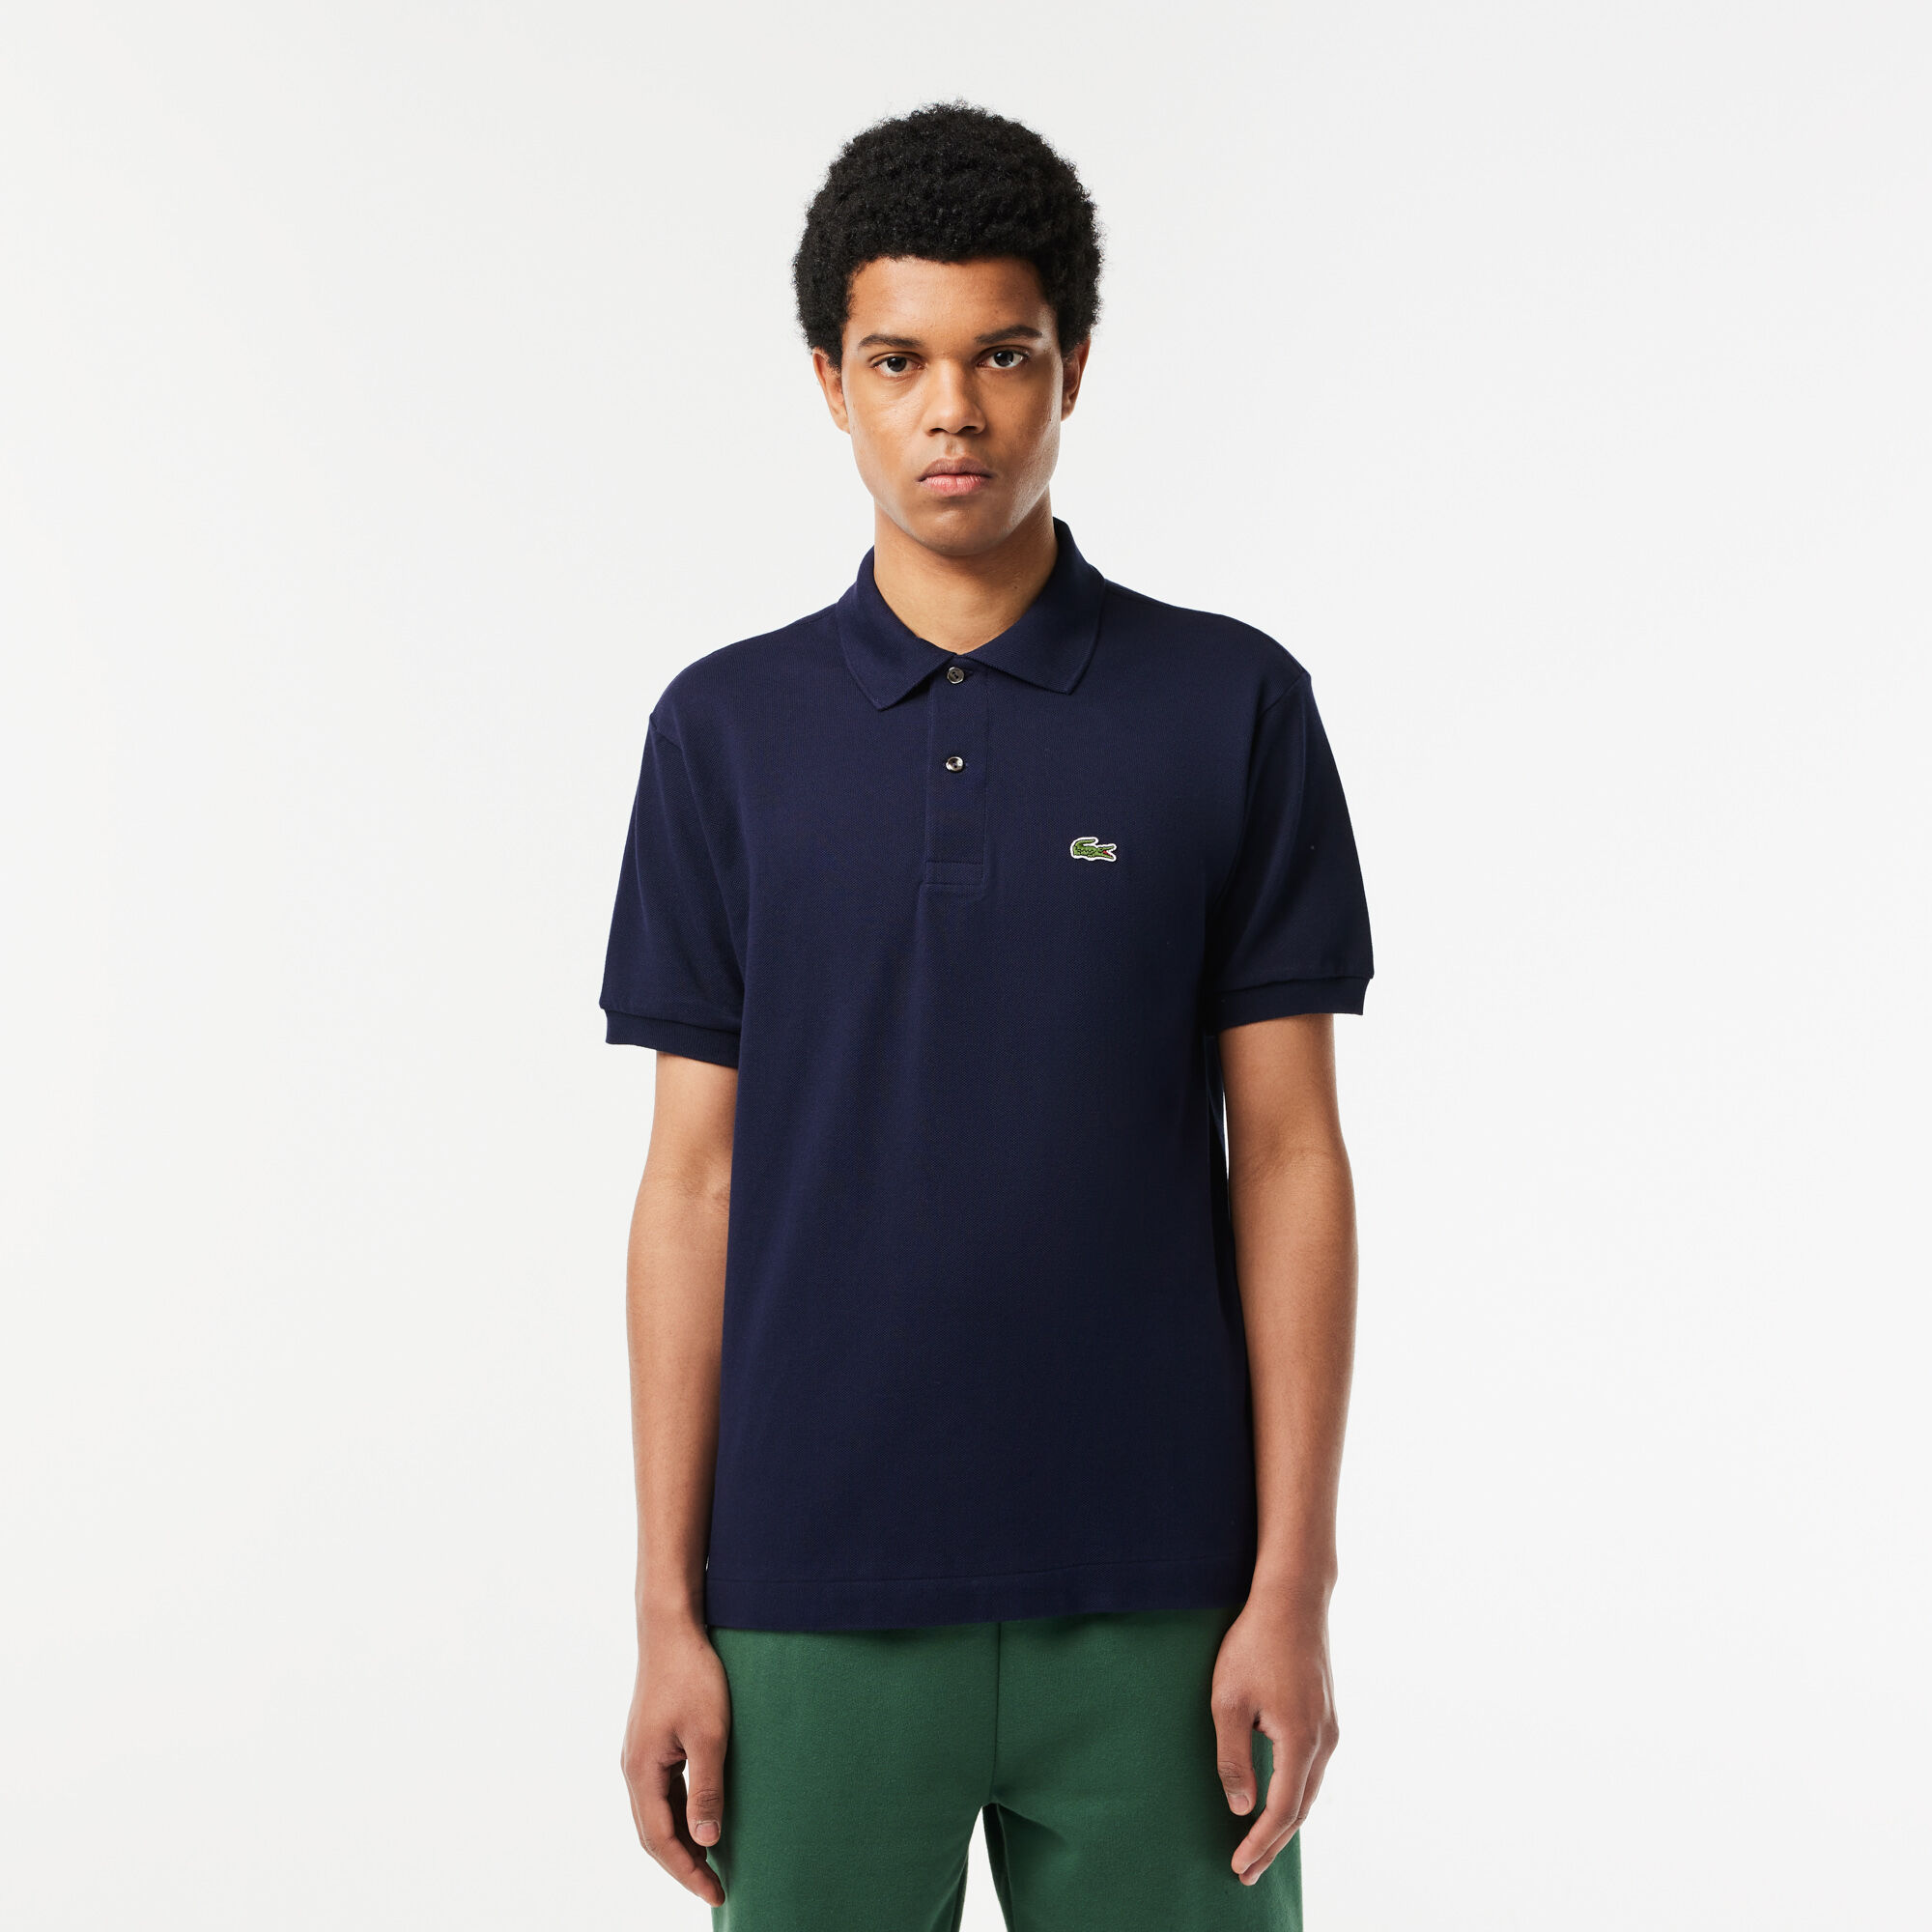 lacoste t shirt price in uae